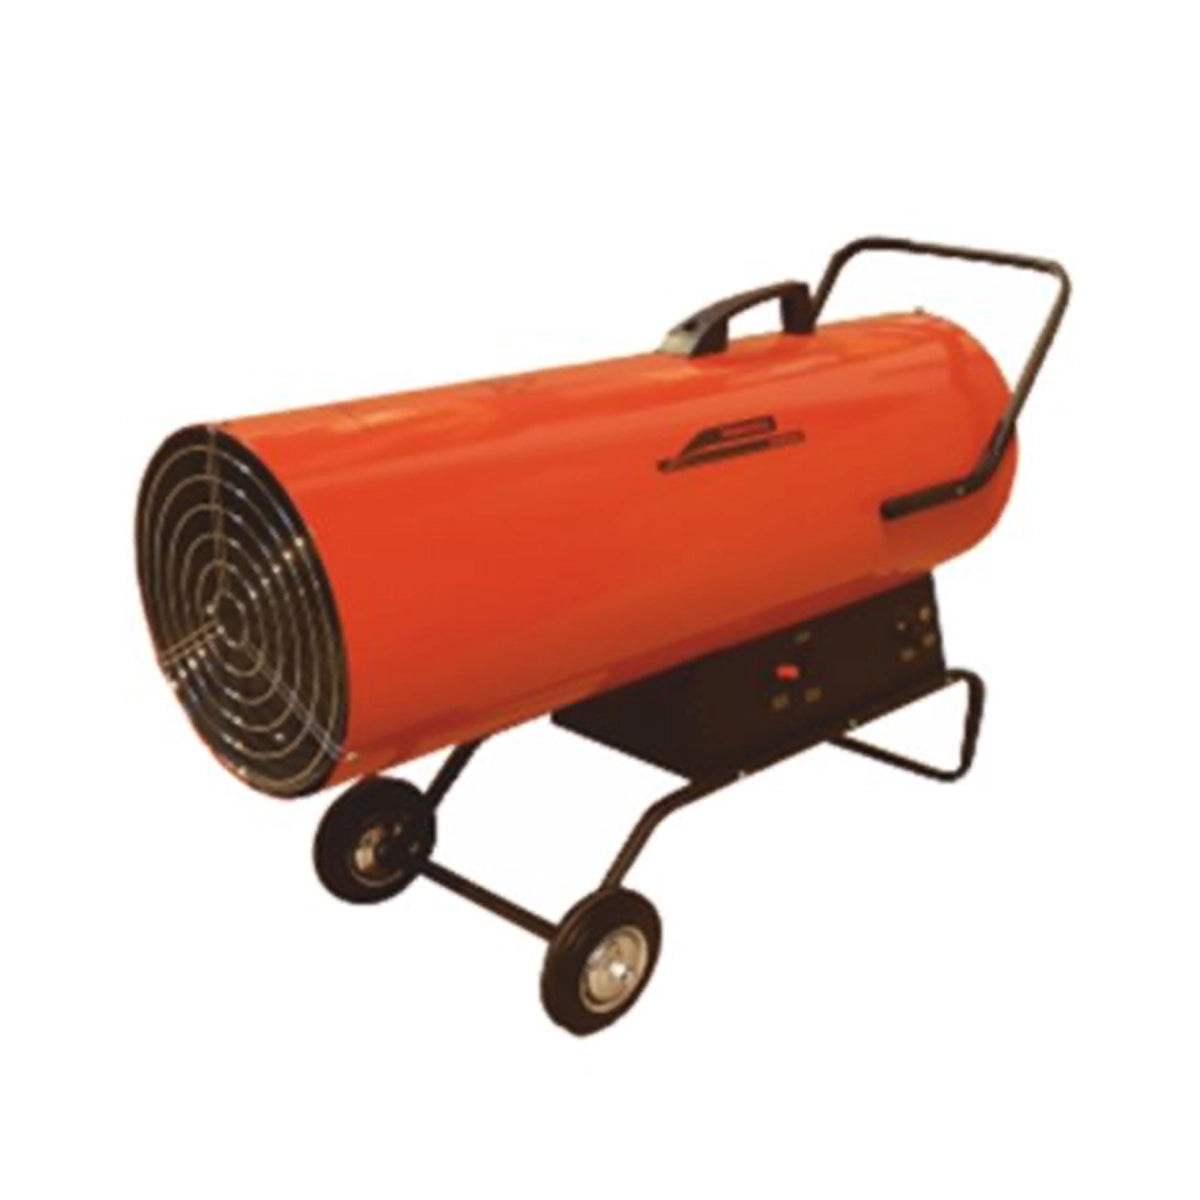 Thermobile GR 85 Portable LPG Space Heater